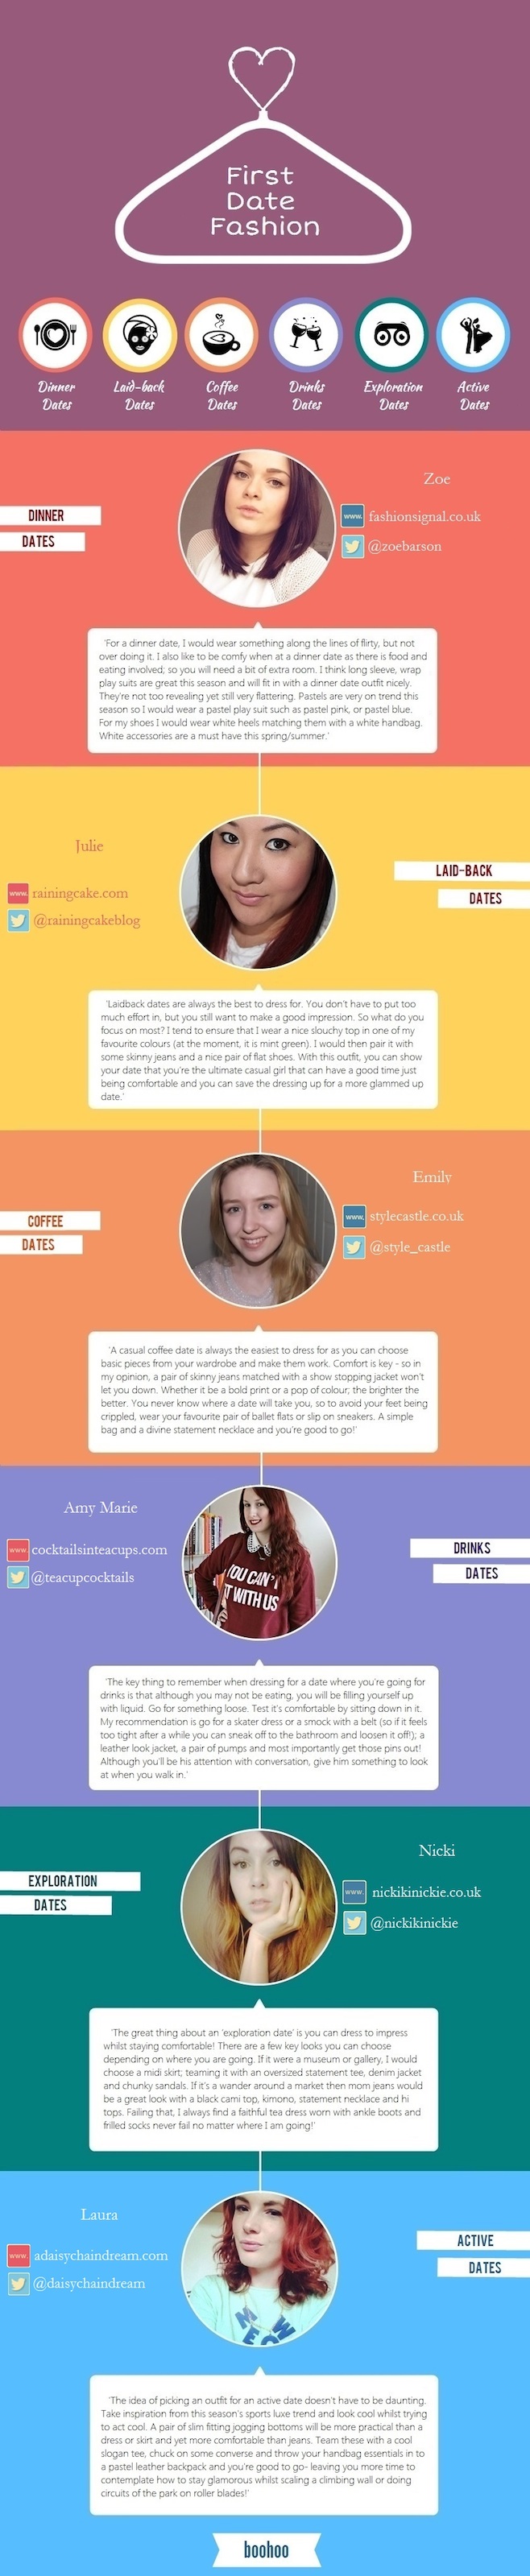 First Date Fashion Infographic Edit